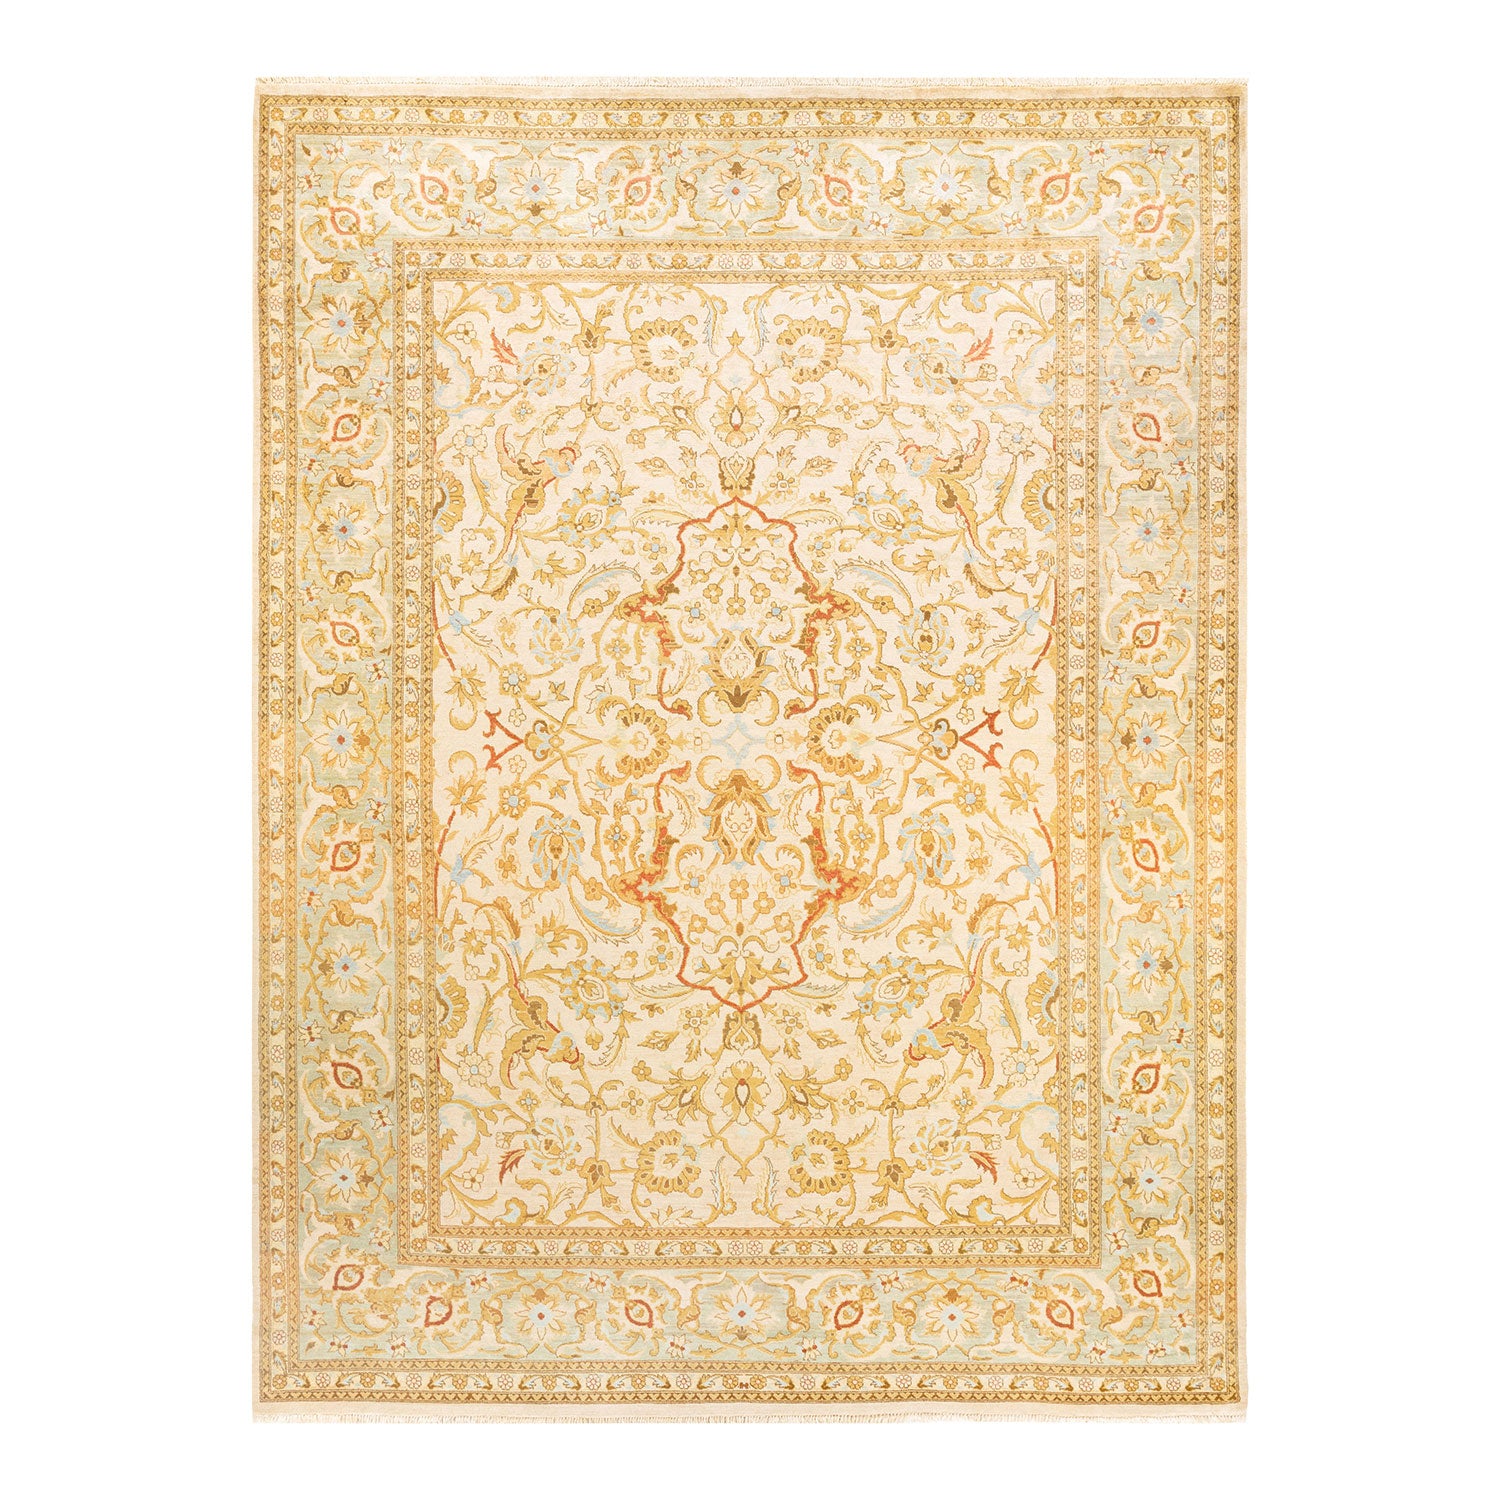 Exquisite Persian rug with intricate design adds elegance to any space.